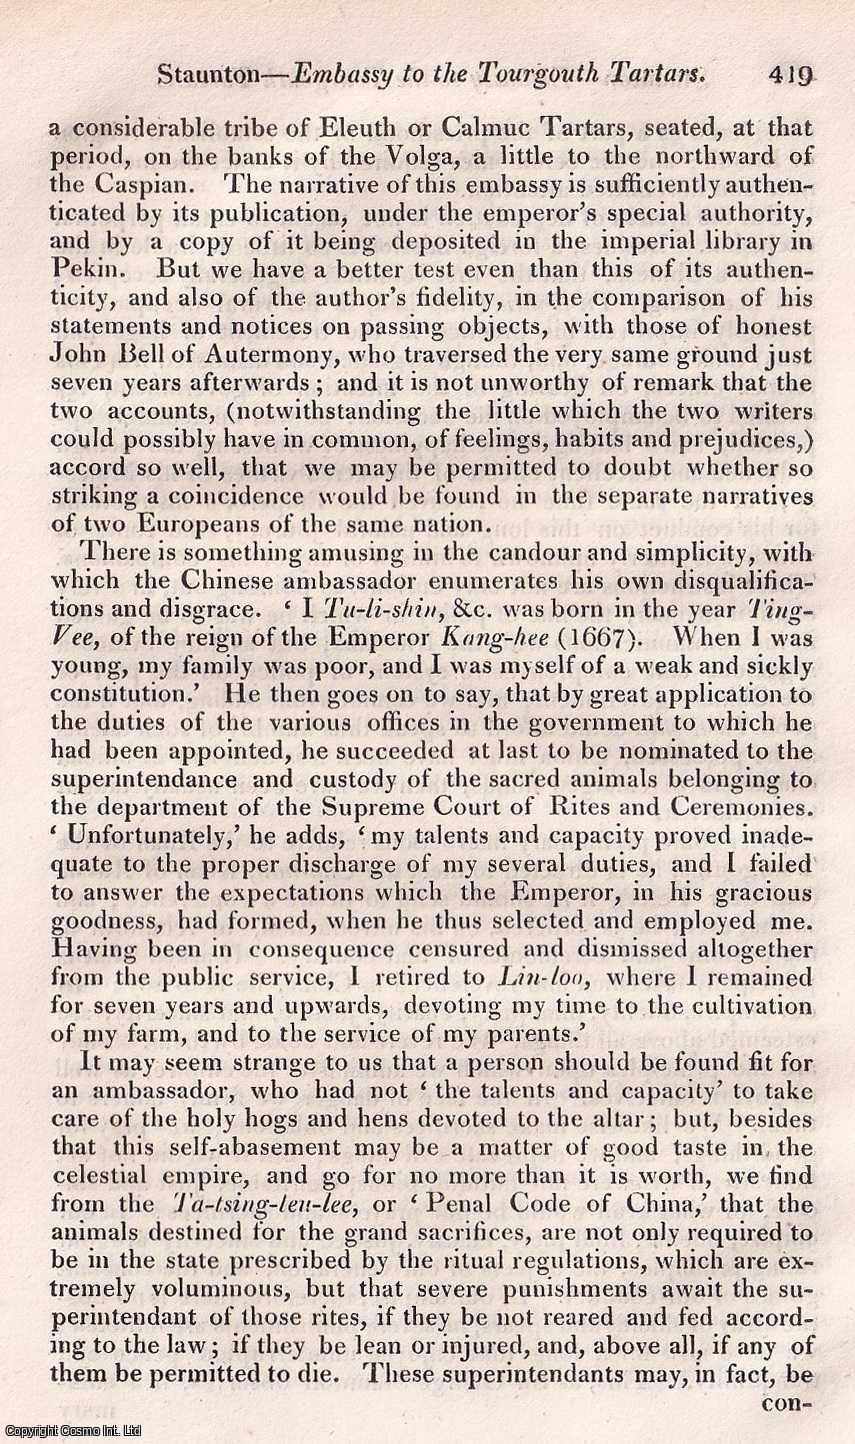 John Barrow - Narrative of The Chinese Embassy to The Khan of The Tourgouth Tartars in The Years 1712, 1713, 1714 and 1715; by the Chinese Ambassador. Translated from the Chinese by Sir George Thomas Staunton.